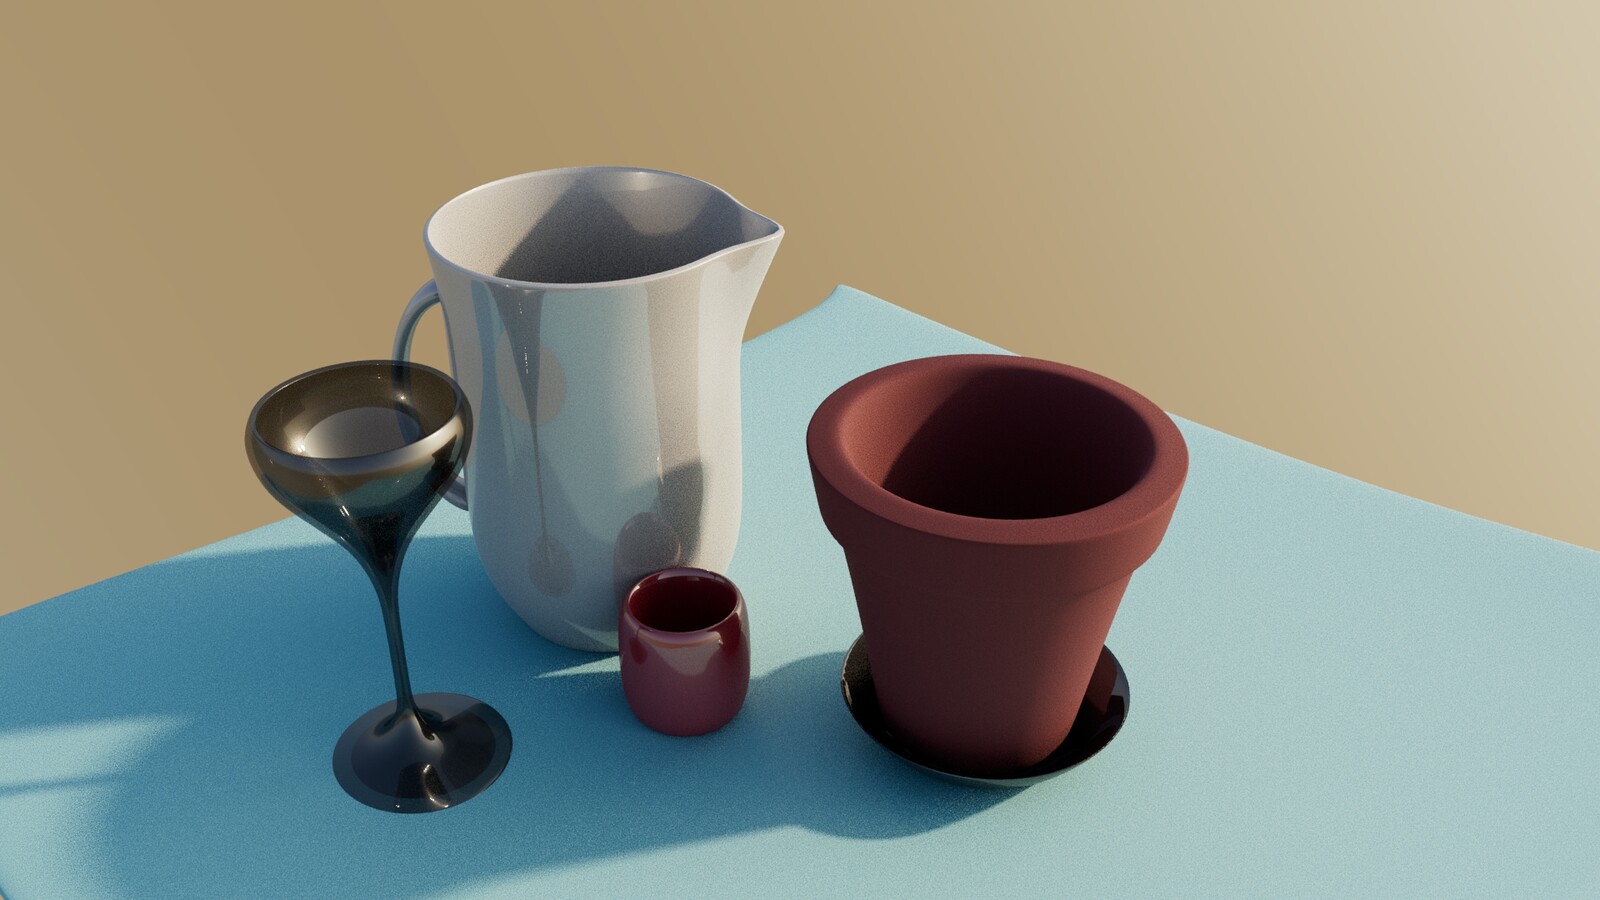 Made with Arnold engine